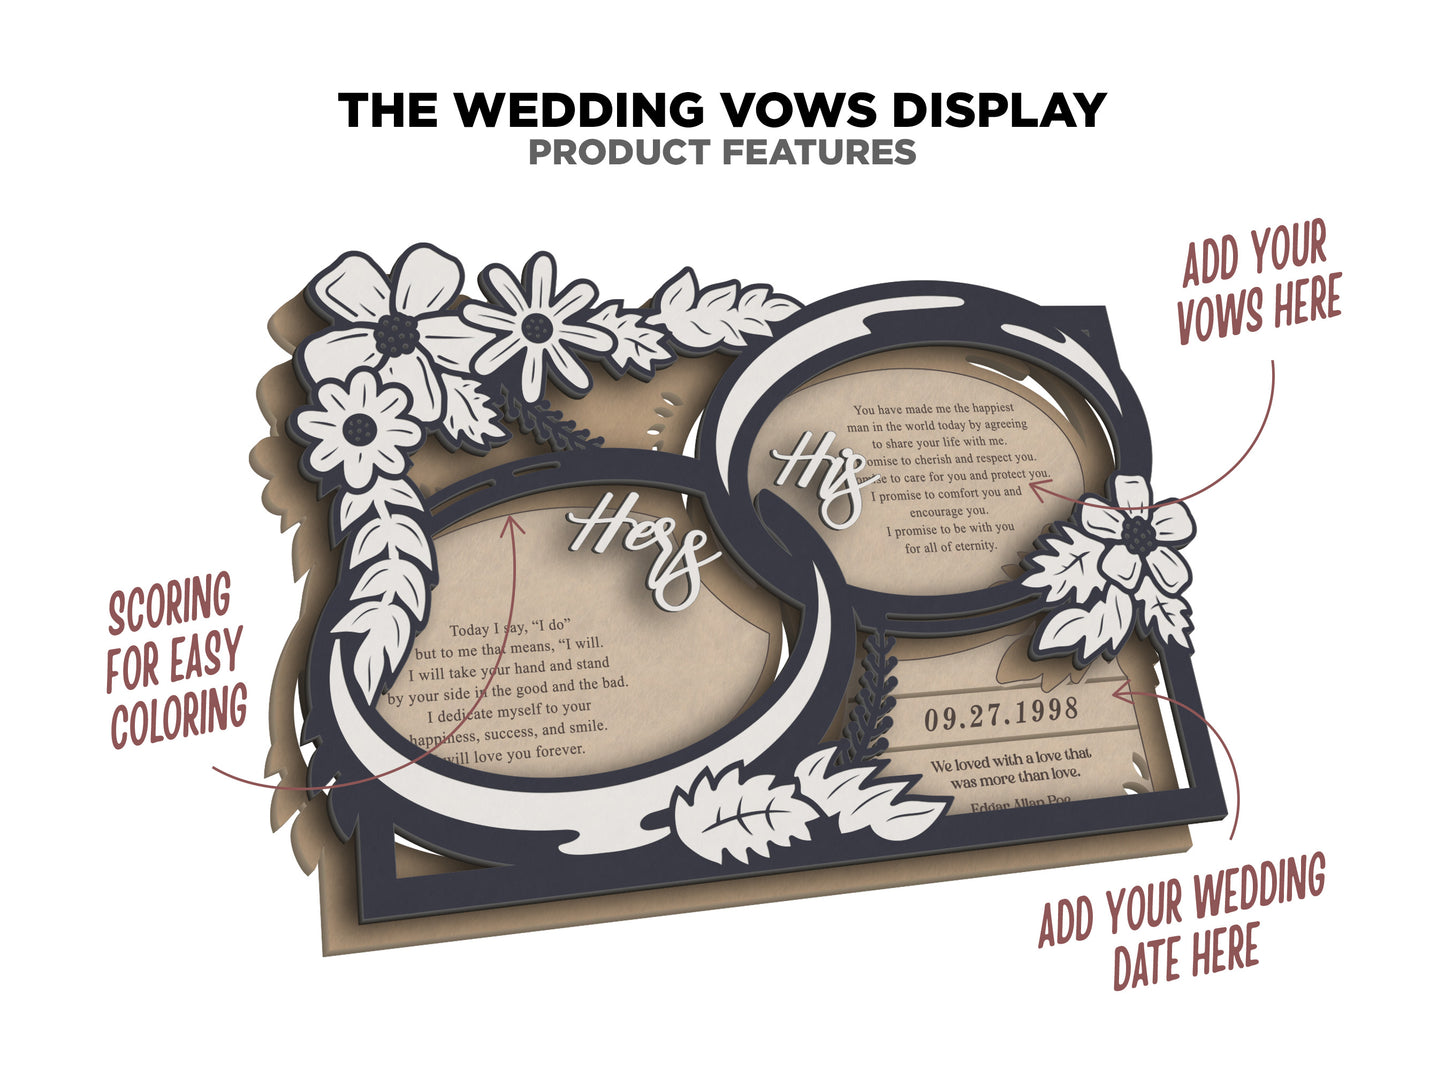 The Wedding Vow Display - Horizontal and Vertical versions included - SVG File Download - Glowforge & Lightburn Tested